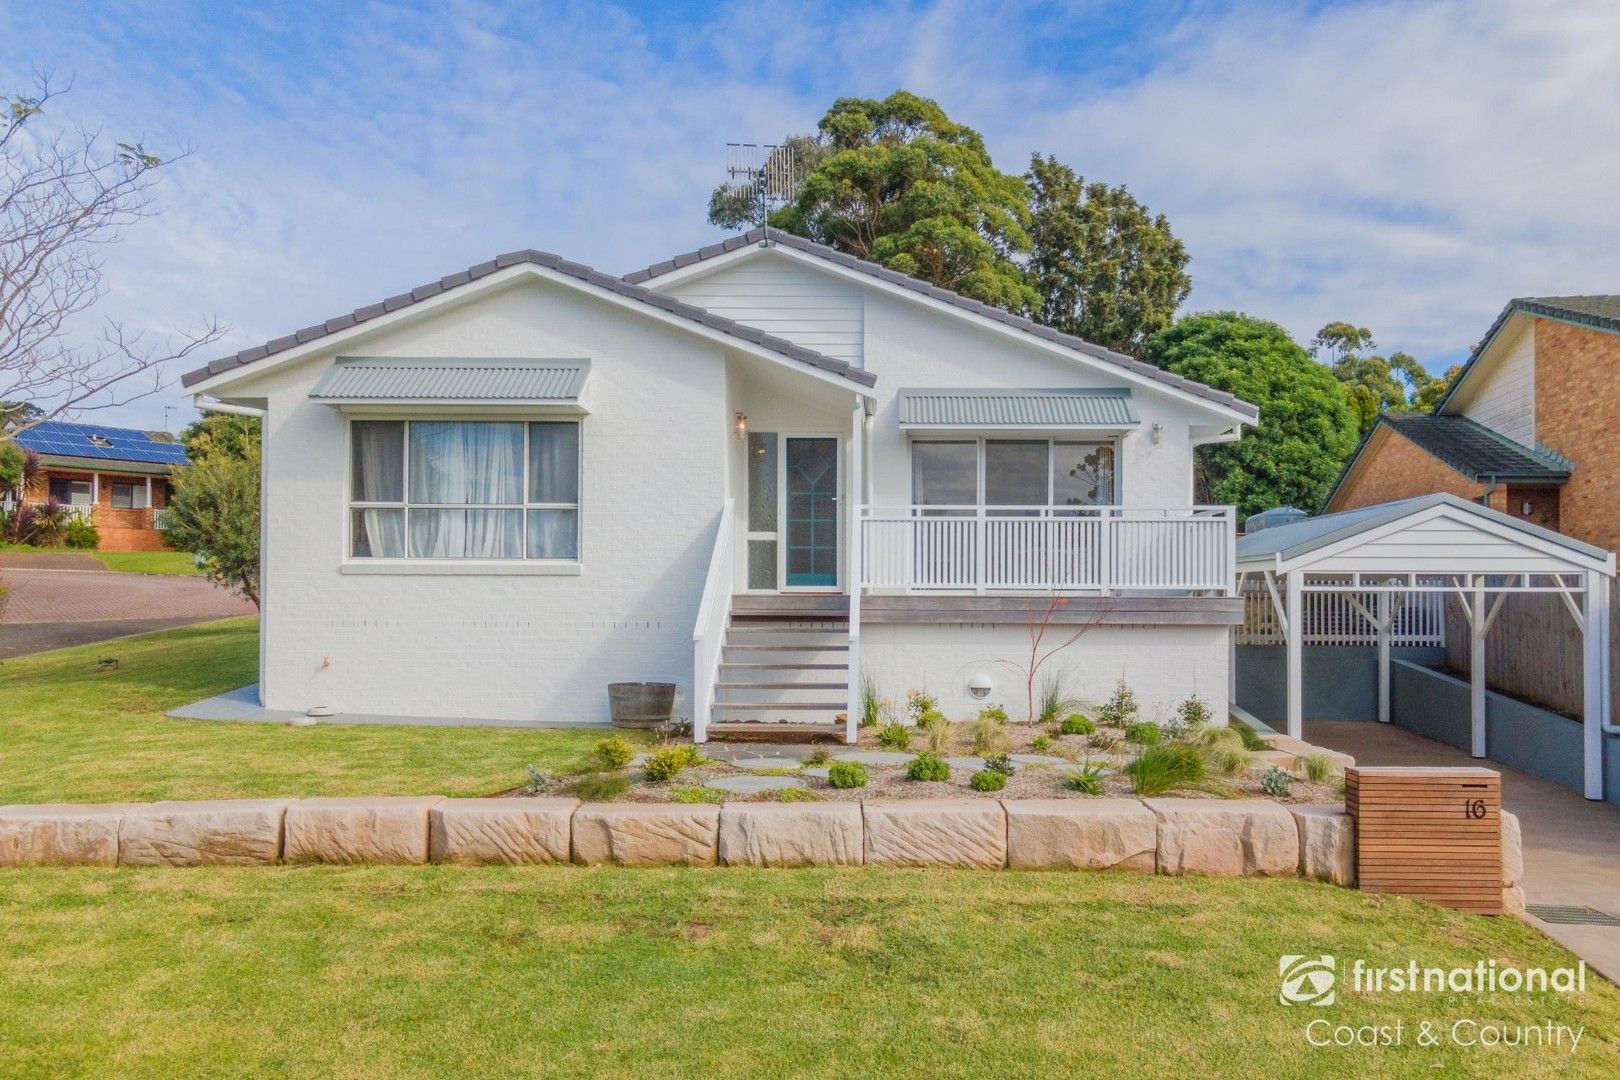 1/16 Willowbank Place, Gerringong NSW 2534, Image 0